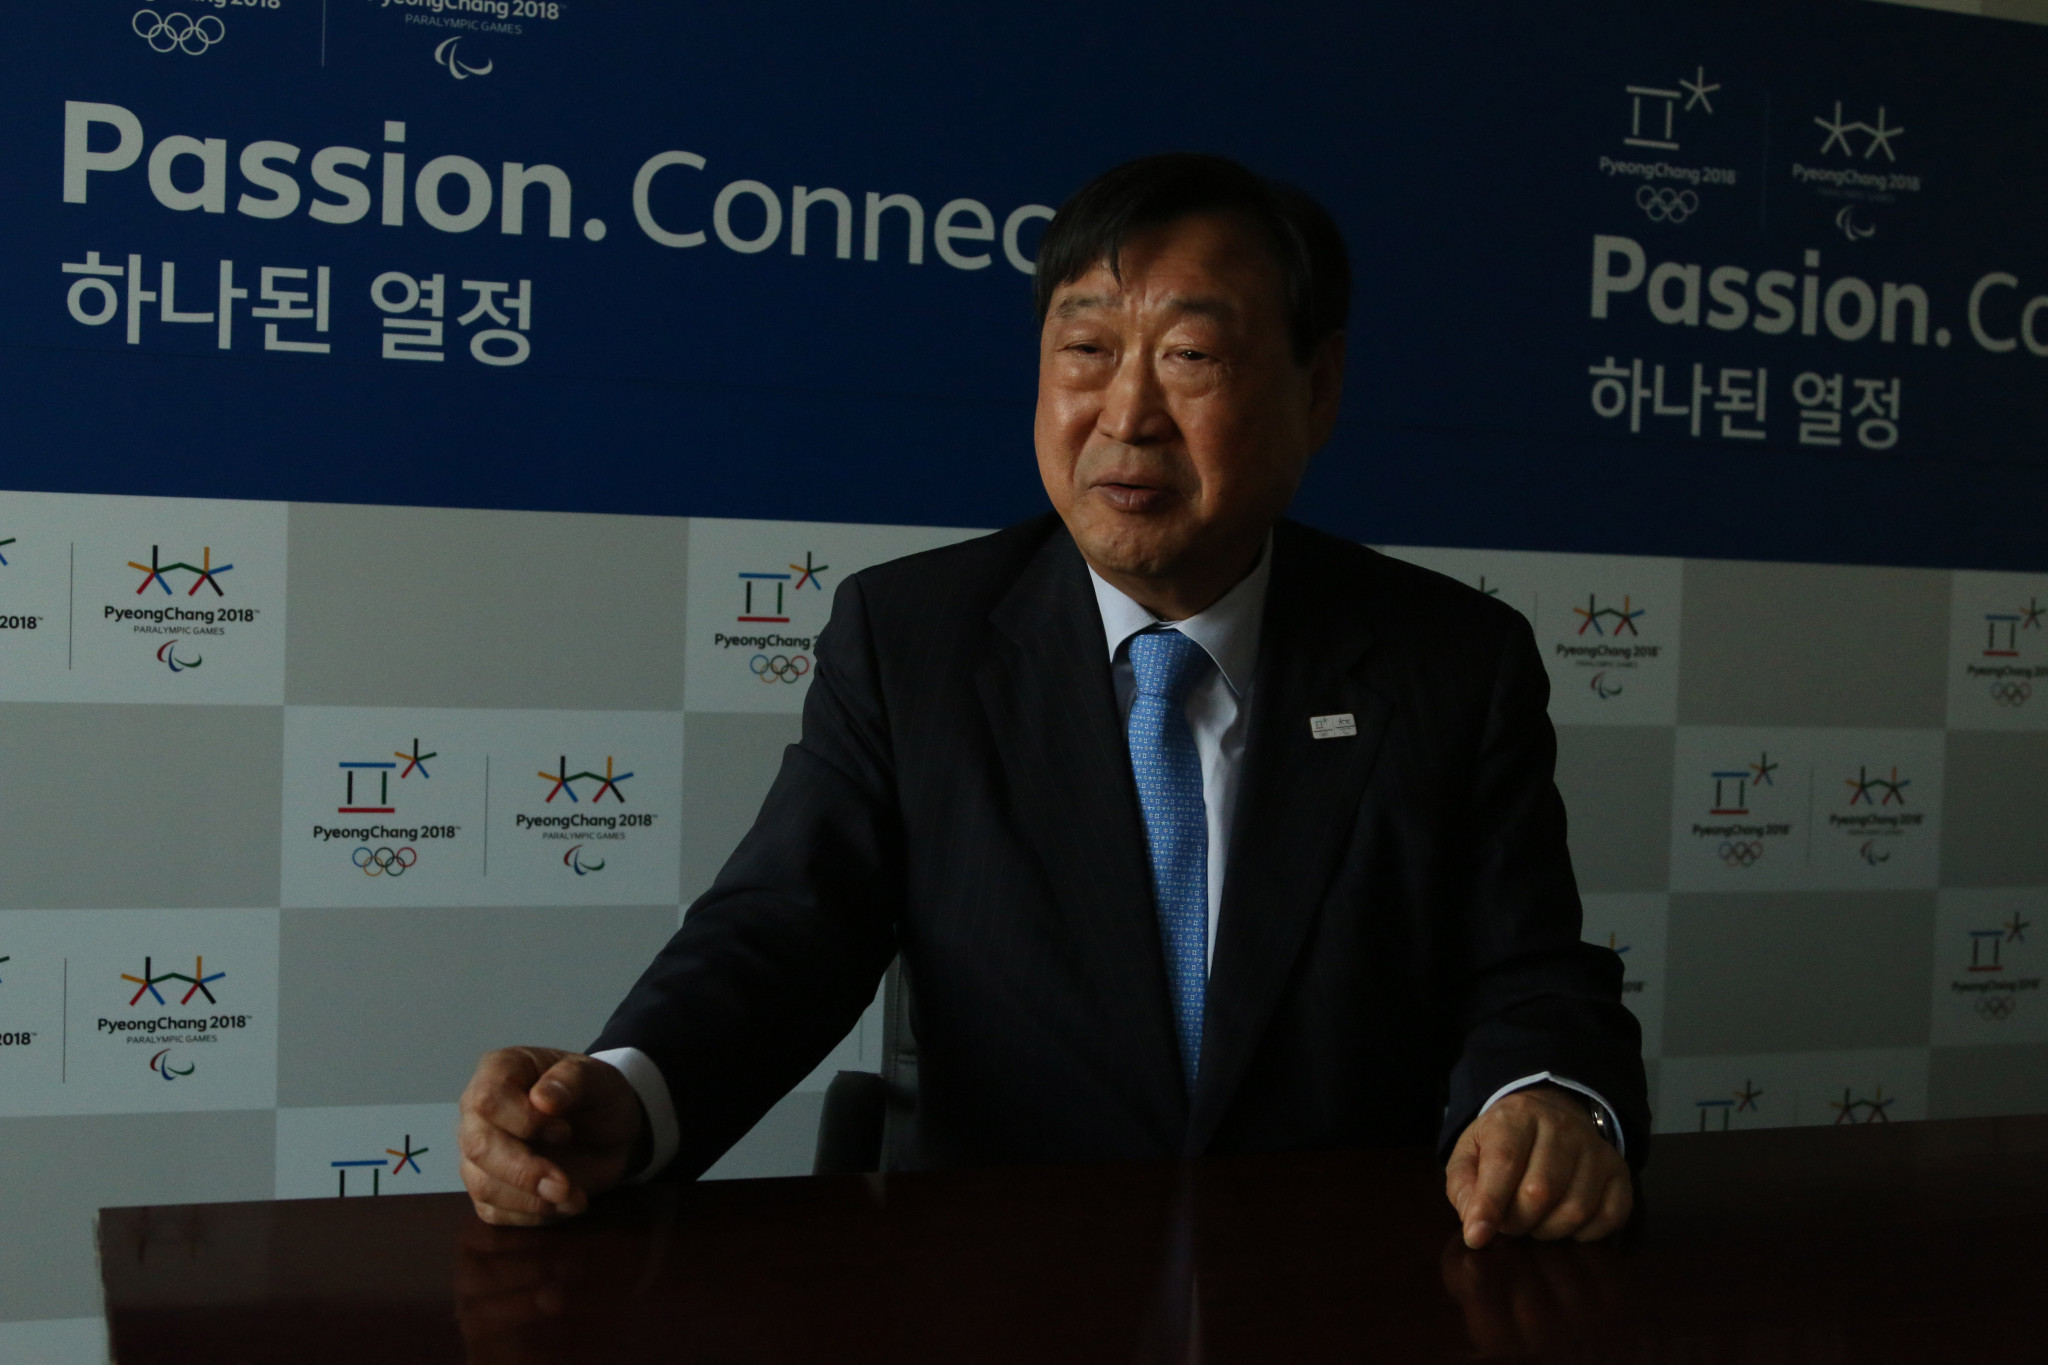 Pyeongchang 2018 President Lee-hee Boem has previously expressed his hope North Korea would compete at the Games ©Getty Images